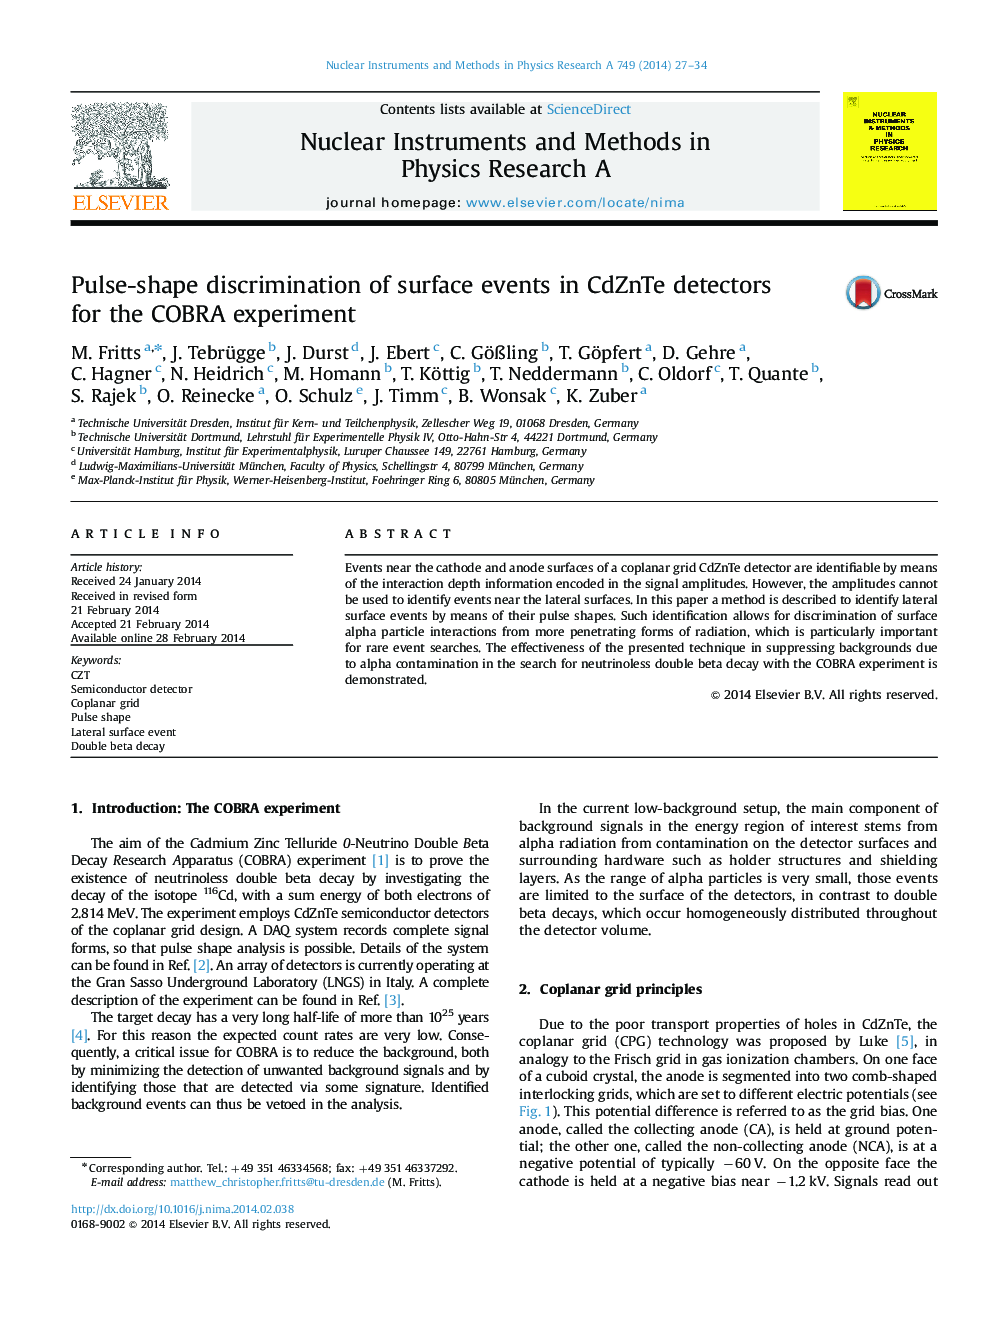 Pulse-shape discrimination of surface events in CdZnTe detectors for the COBRA experiment